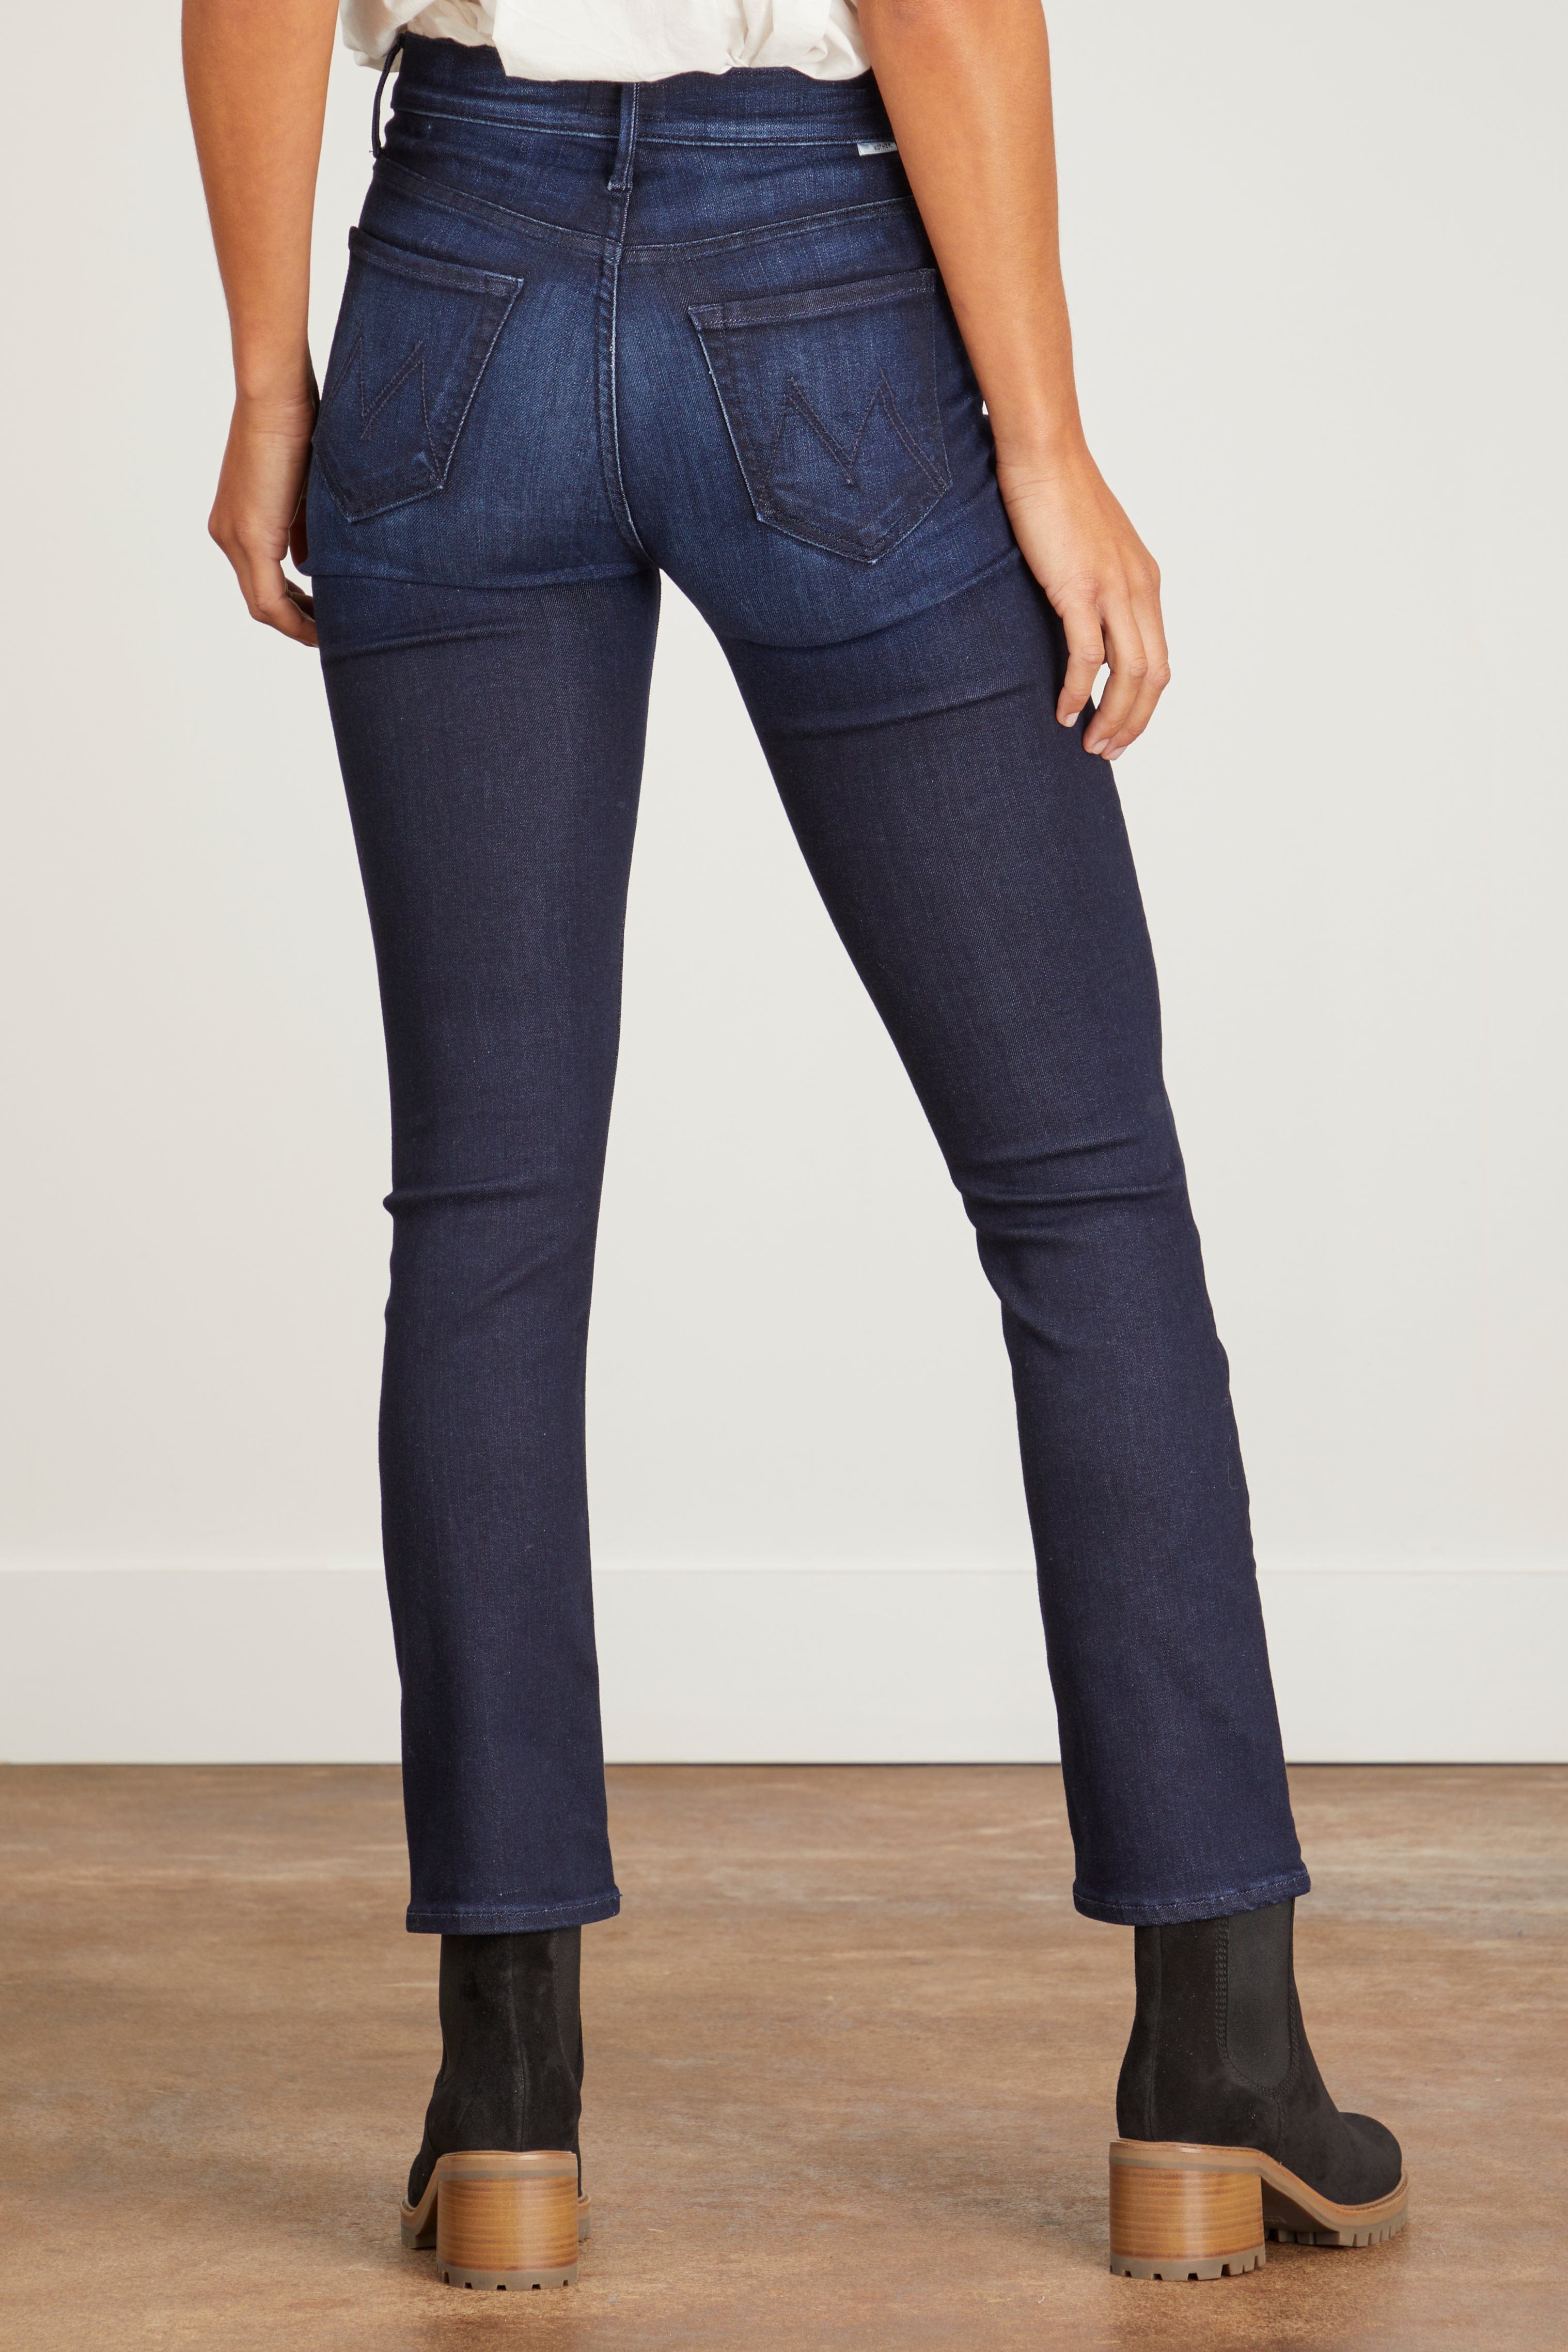 MOTHER Jeans The Mid Rise Dazzler Ankle Jean in Now or Never MOTHER The Mid Rise Dazzler Ankle Jean in Now or Never